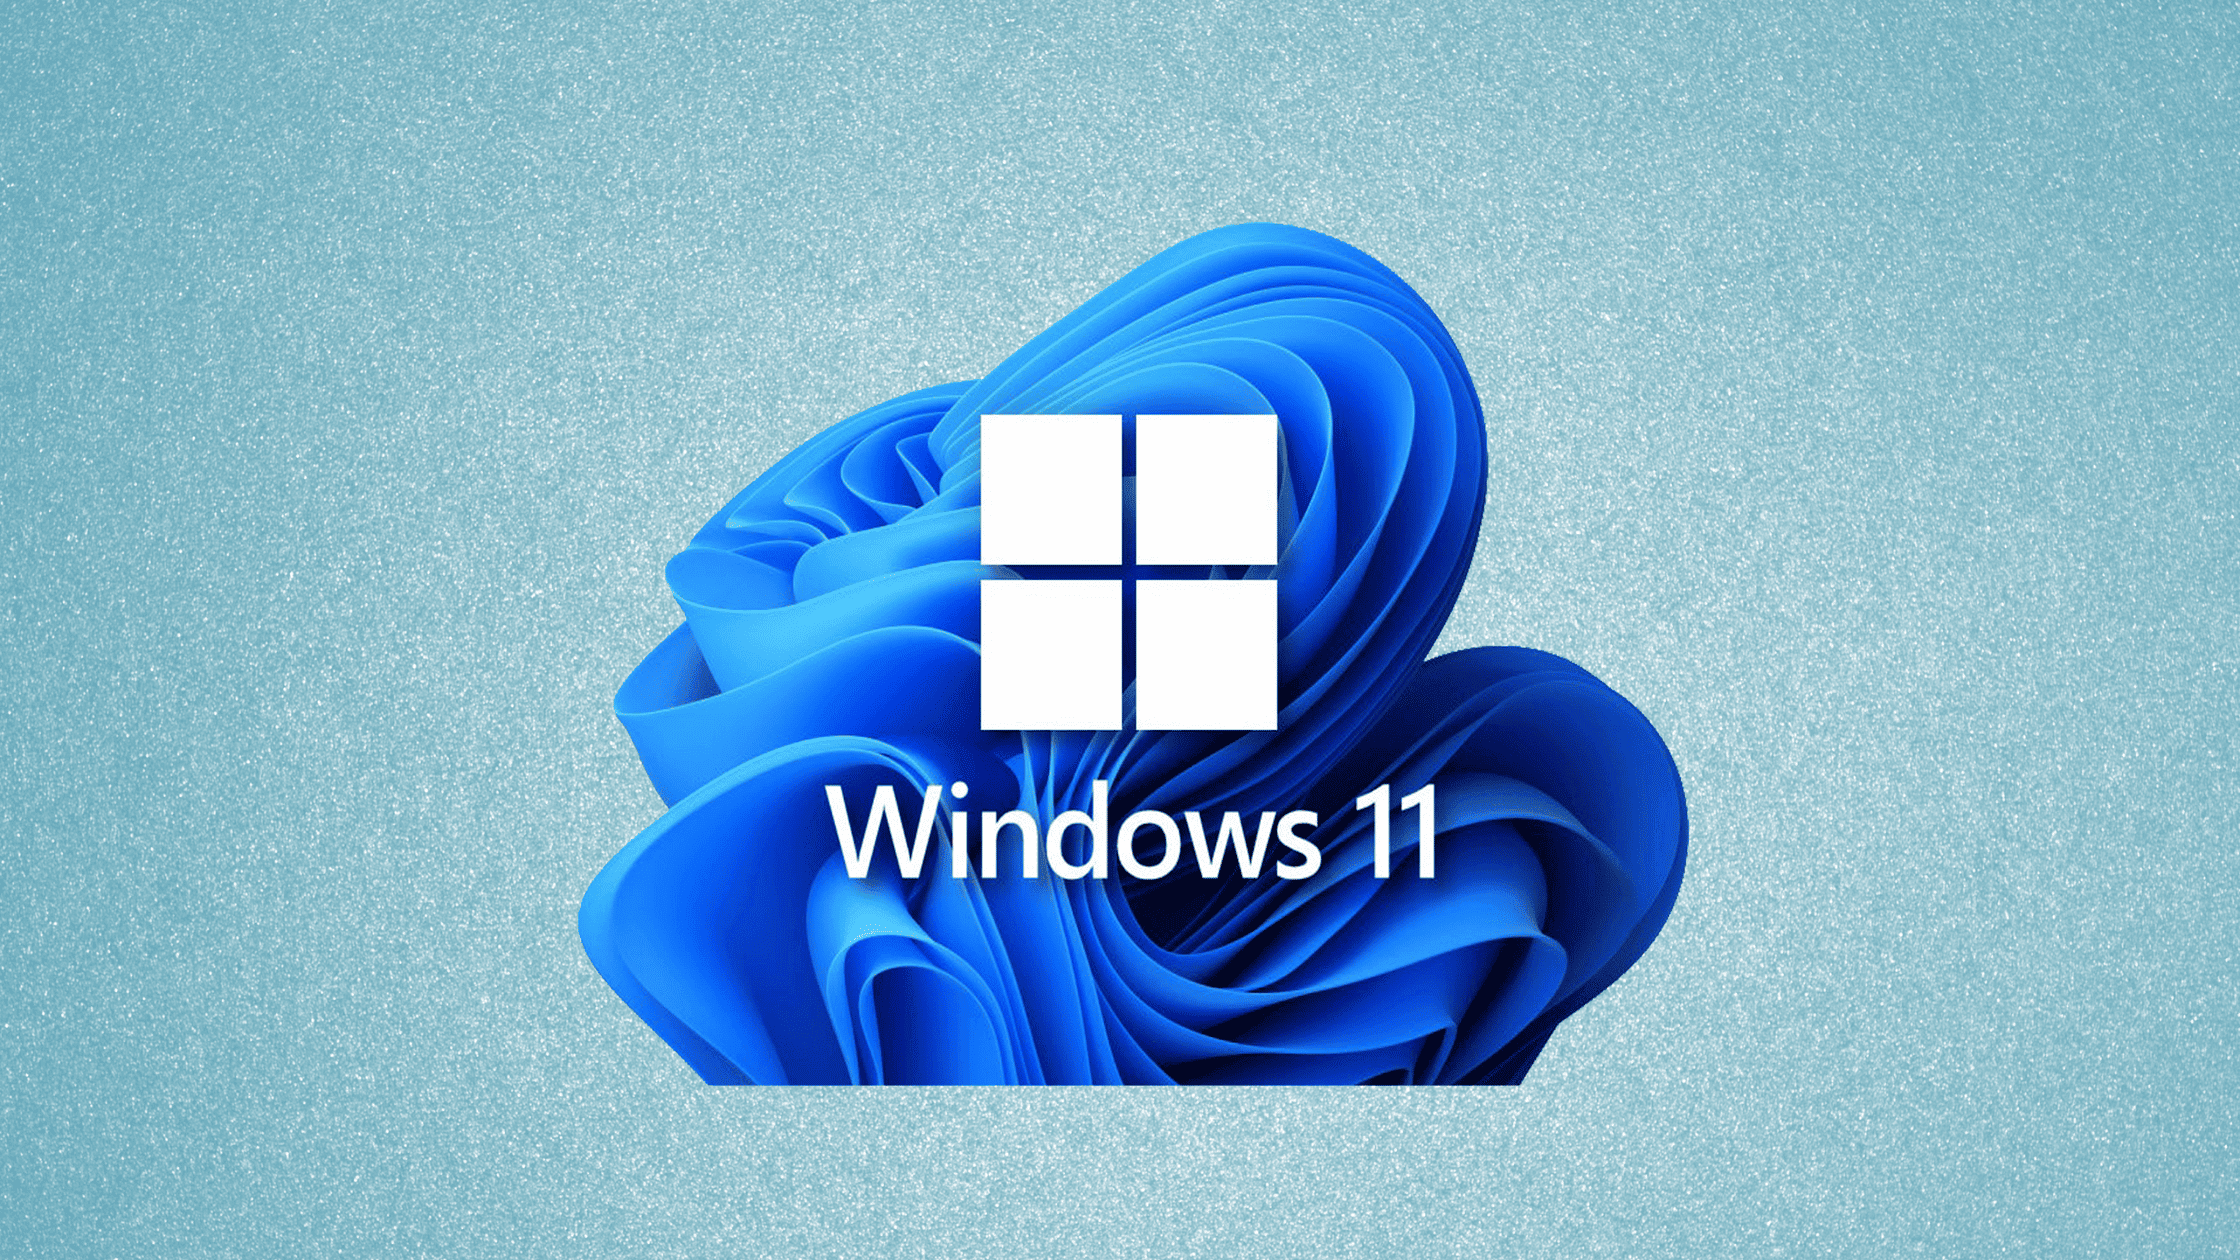 Step By Step Procedure To Install Windows 11 On Unsupported Hardware